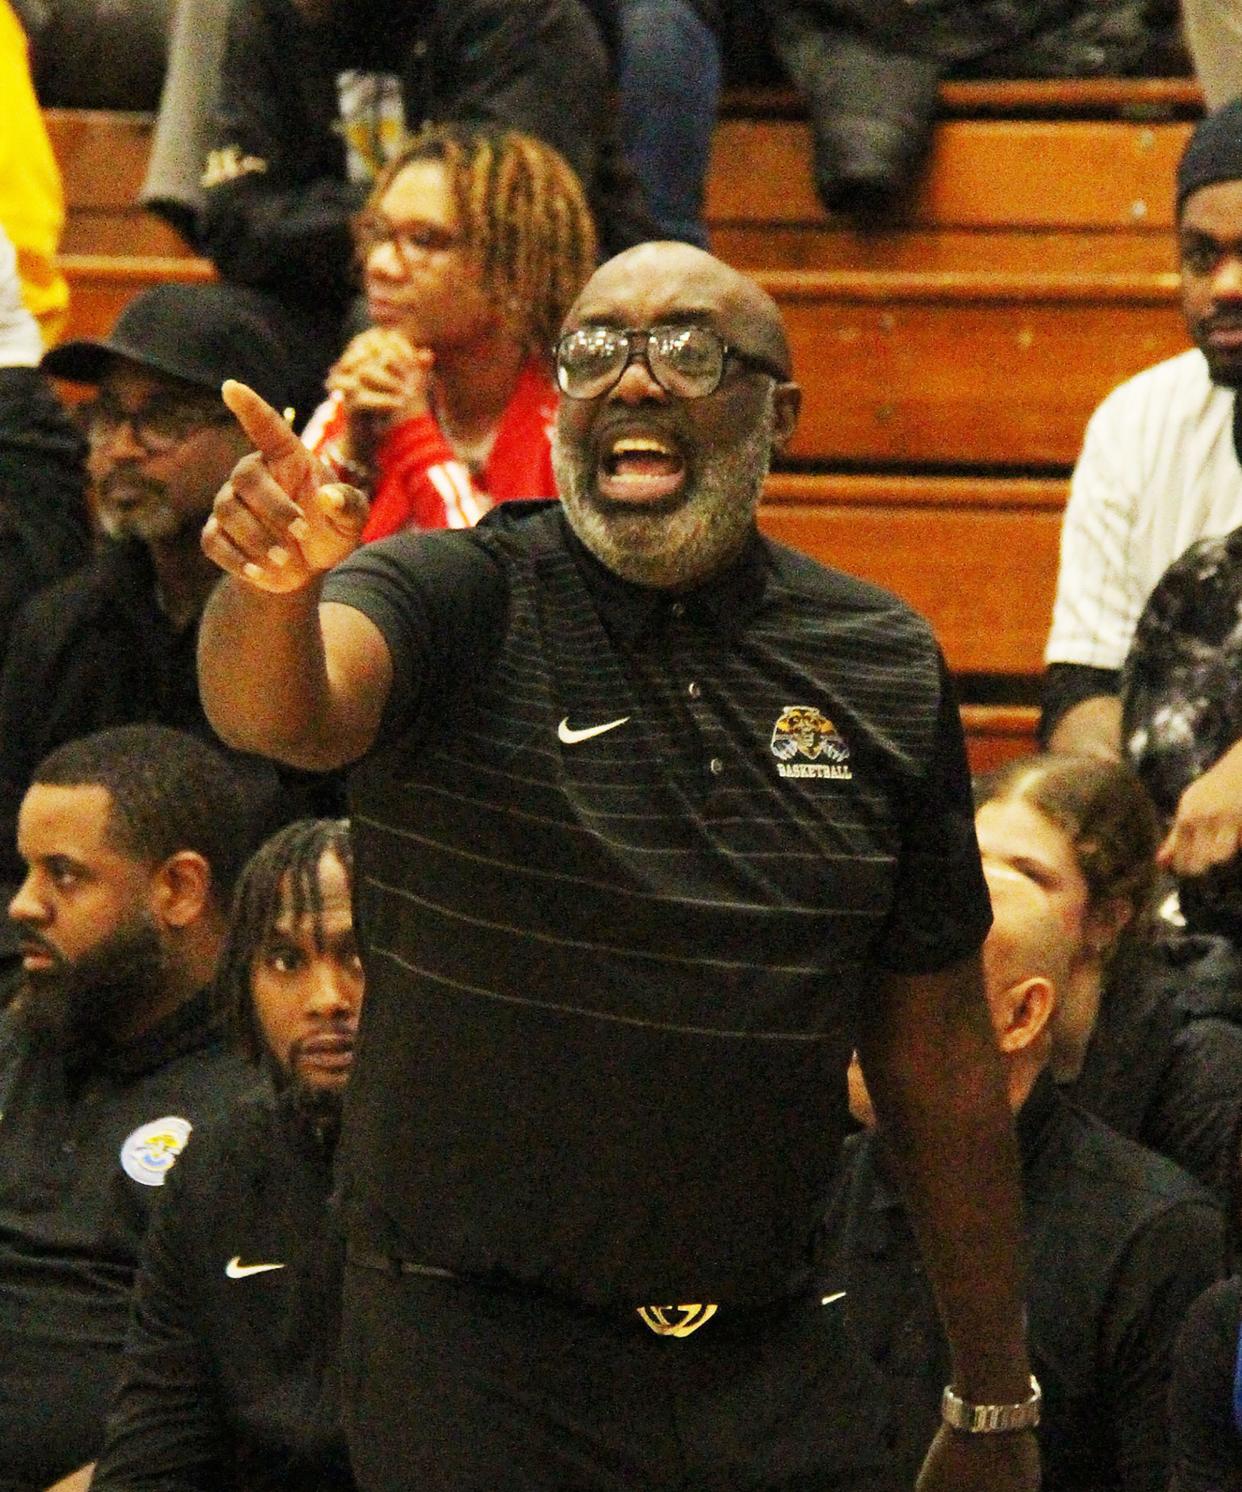 Simeon head coach Robert Smith shouts out instructions during the championship game of the Pontiac Holiday Tournament. Smith's Wolverines won the title for the 11th time under his guidance and 16th time overall.